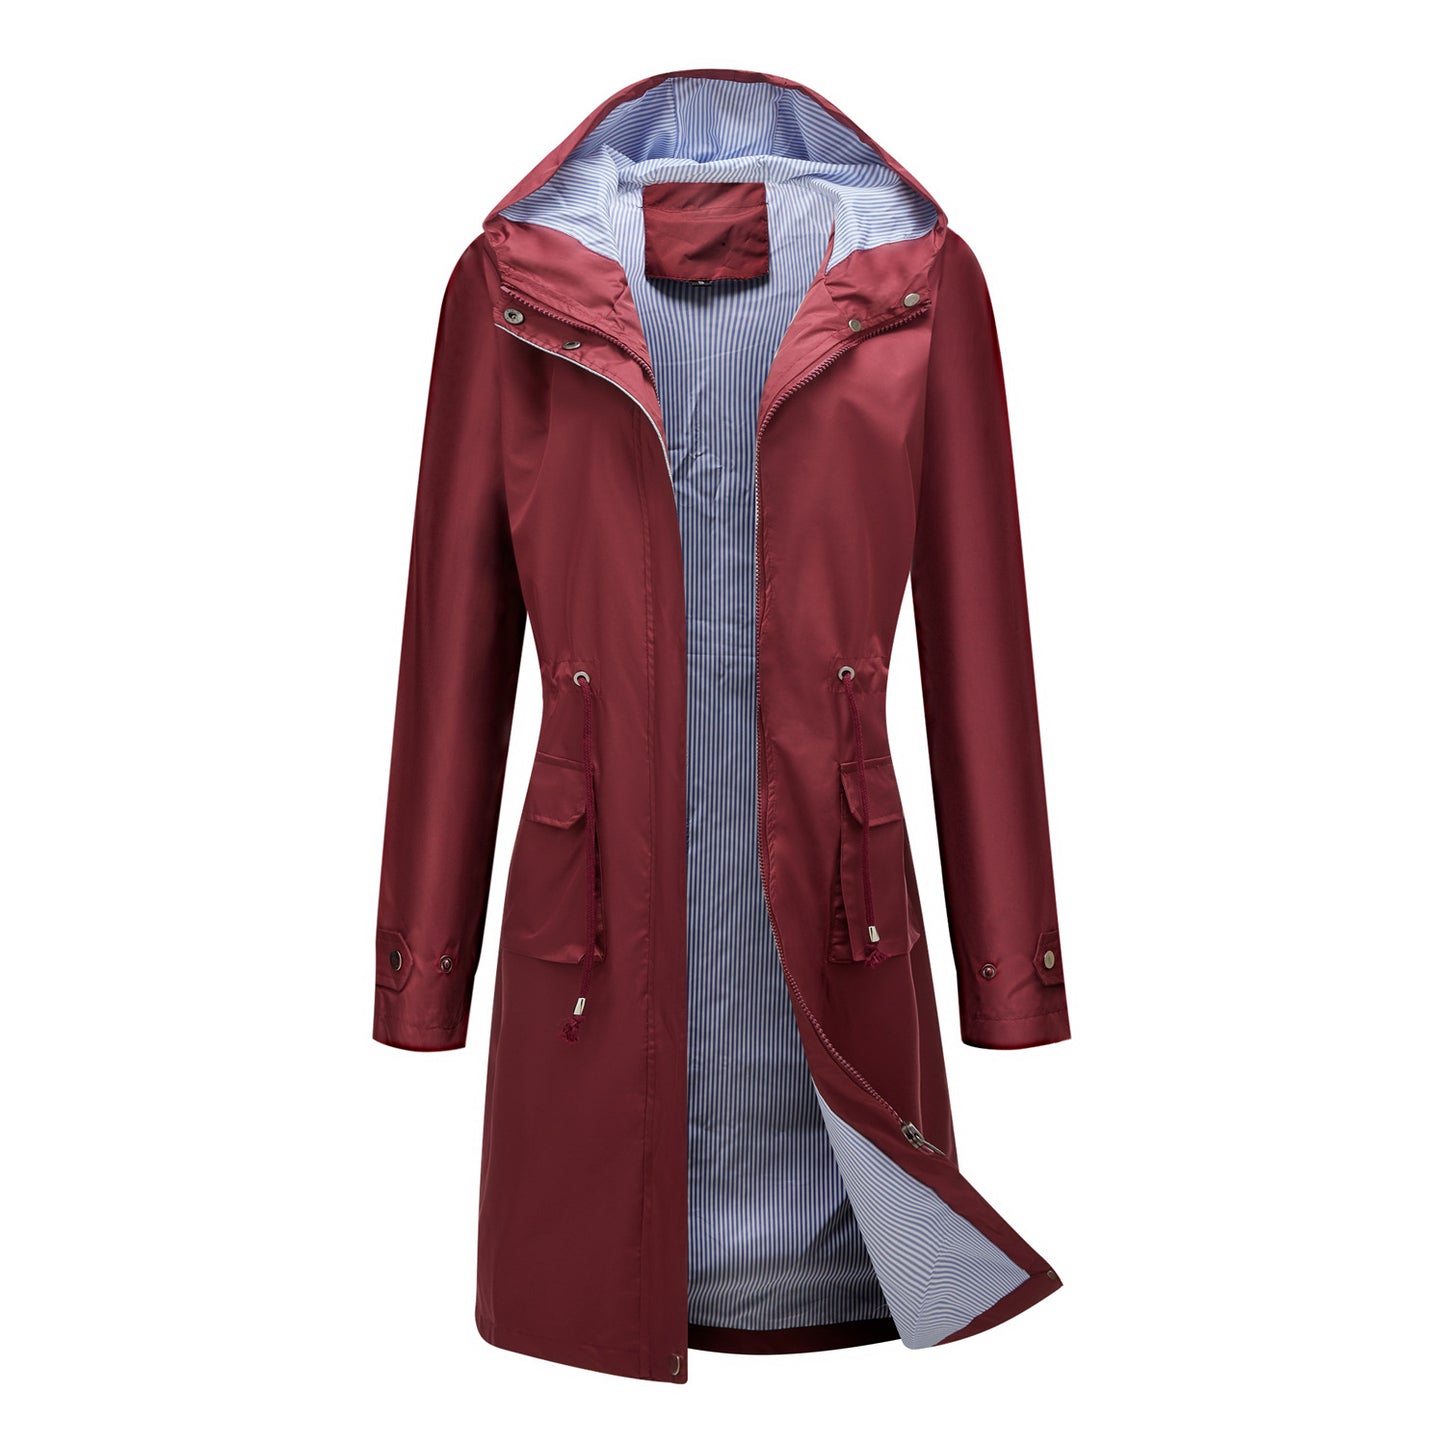 Women's Long Sleeve Hooded Solid Color Jacket